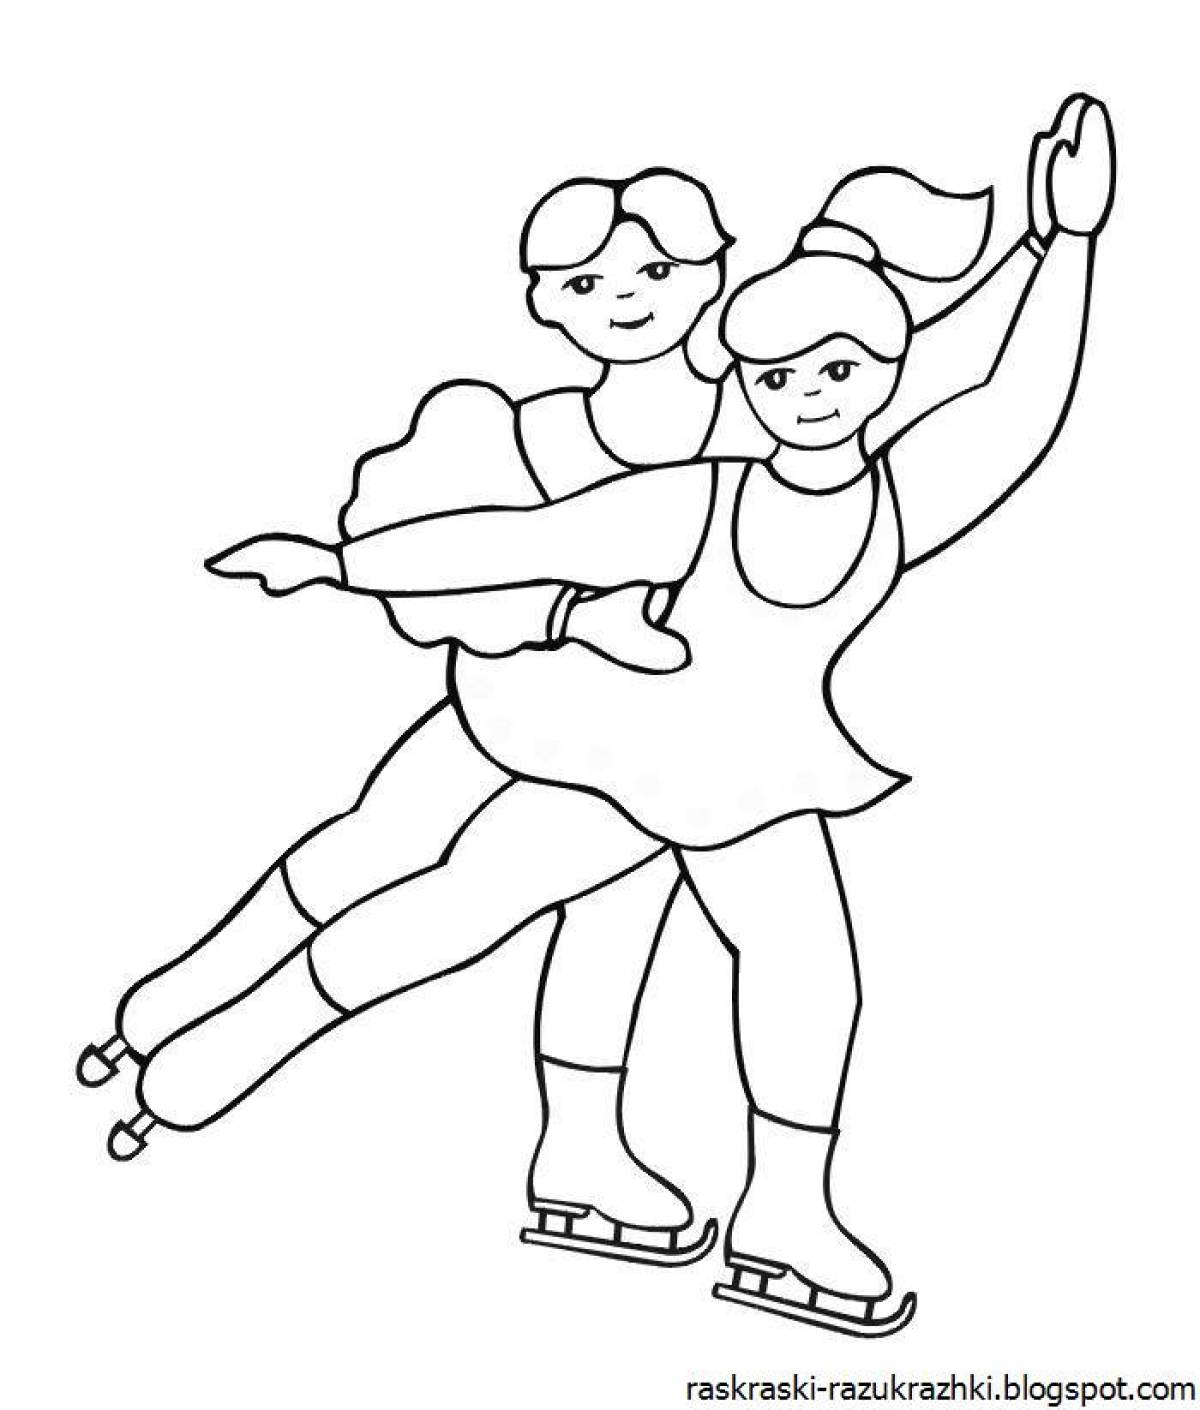 Adorable winter sports coloring book for 6-7 year olds